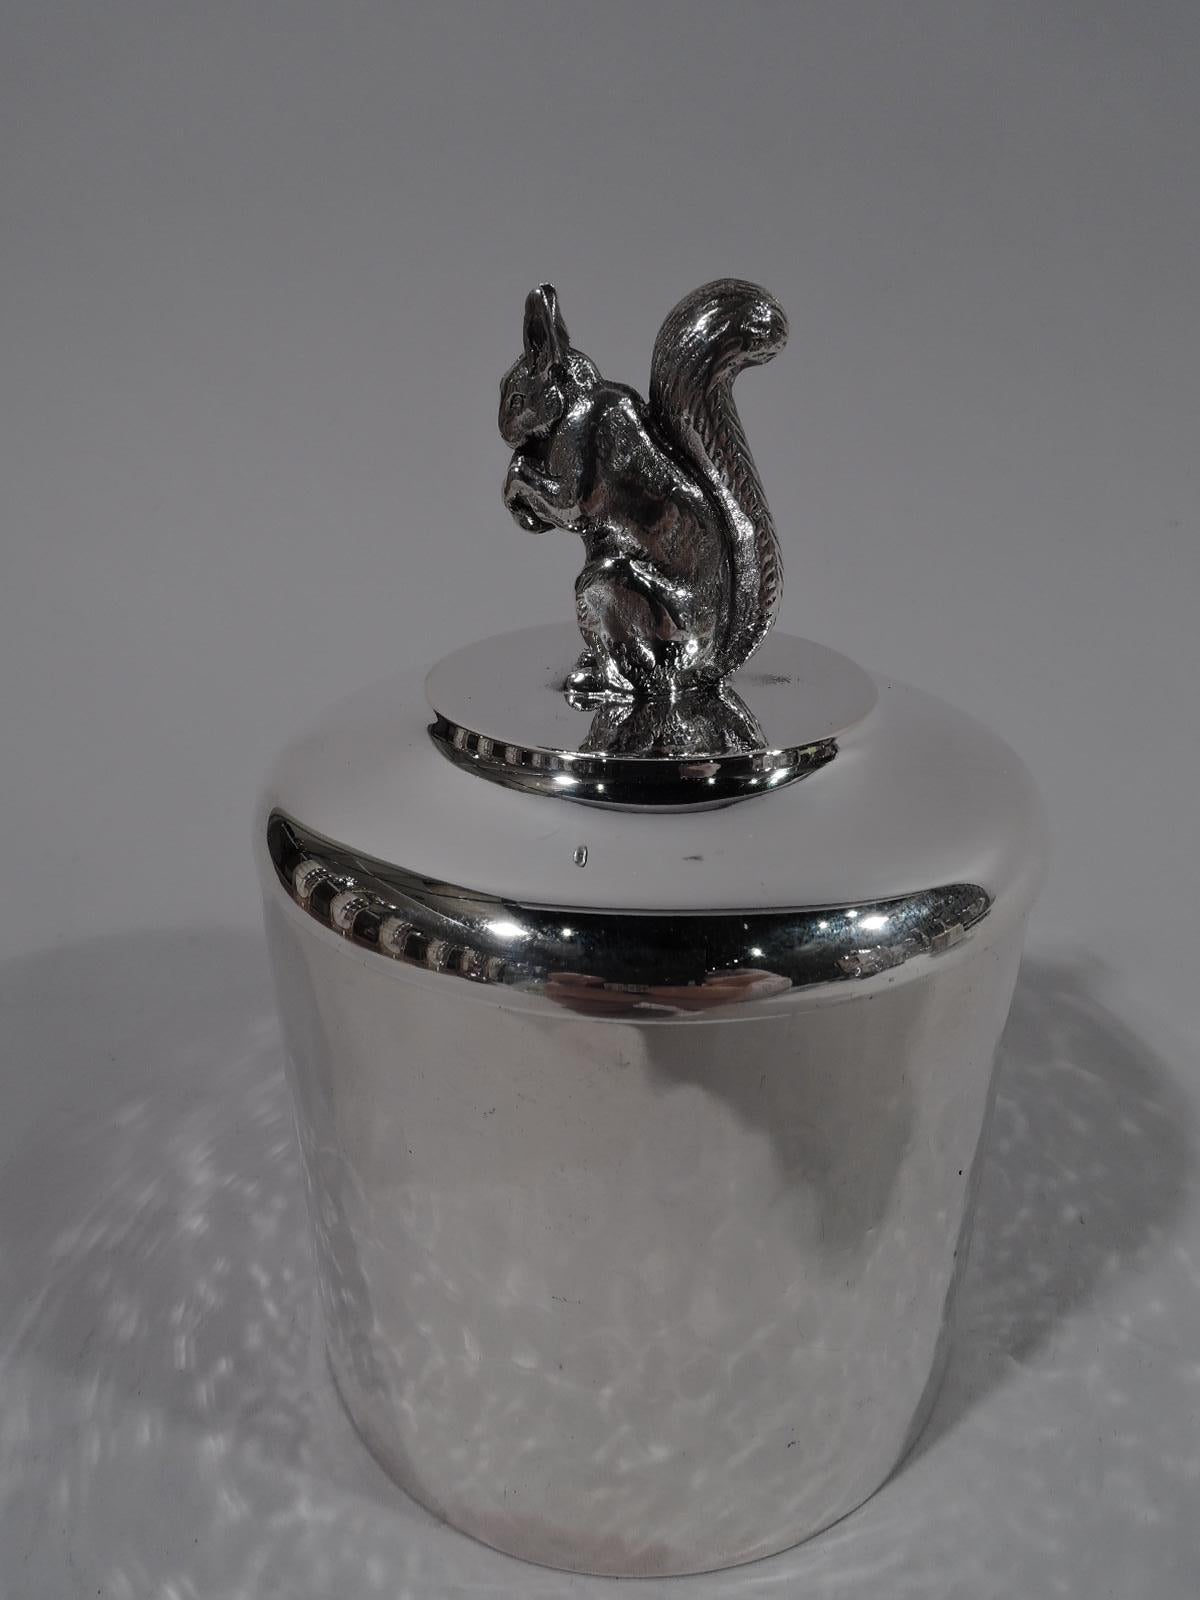 Sweet silver box with squirrel finial. Drum form with soft and shimmering hand hammering. Compatible domed cover with cast nut-nibbler hunched over his find, which he grips with tensile forepaws. Box underside marked “Sterling” with stamp for Marie